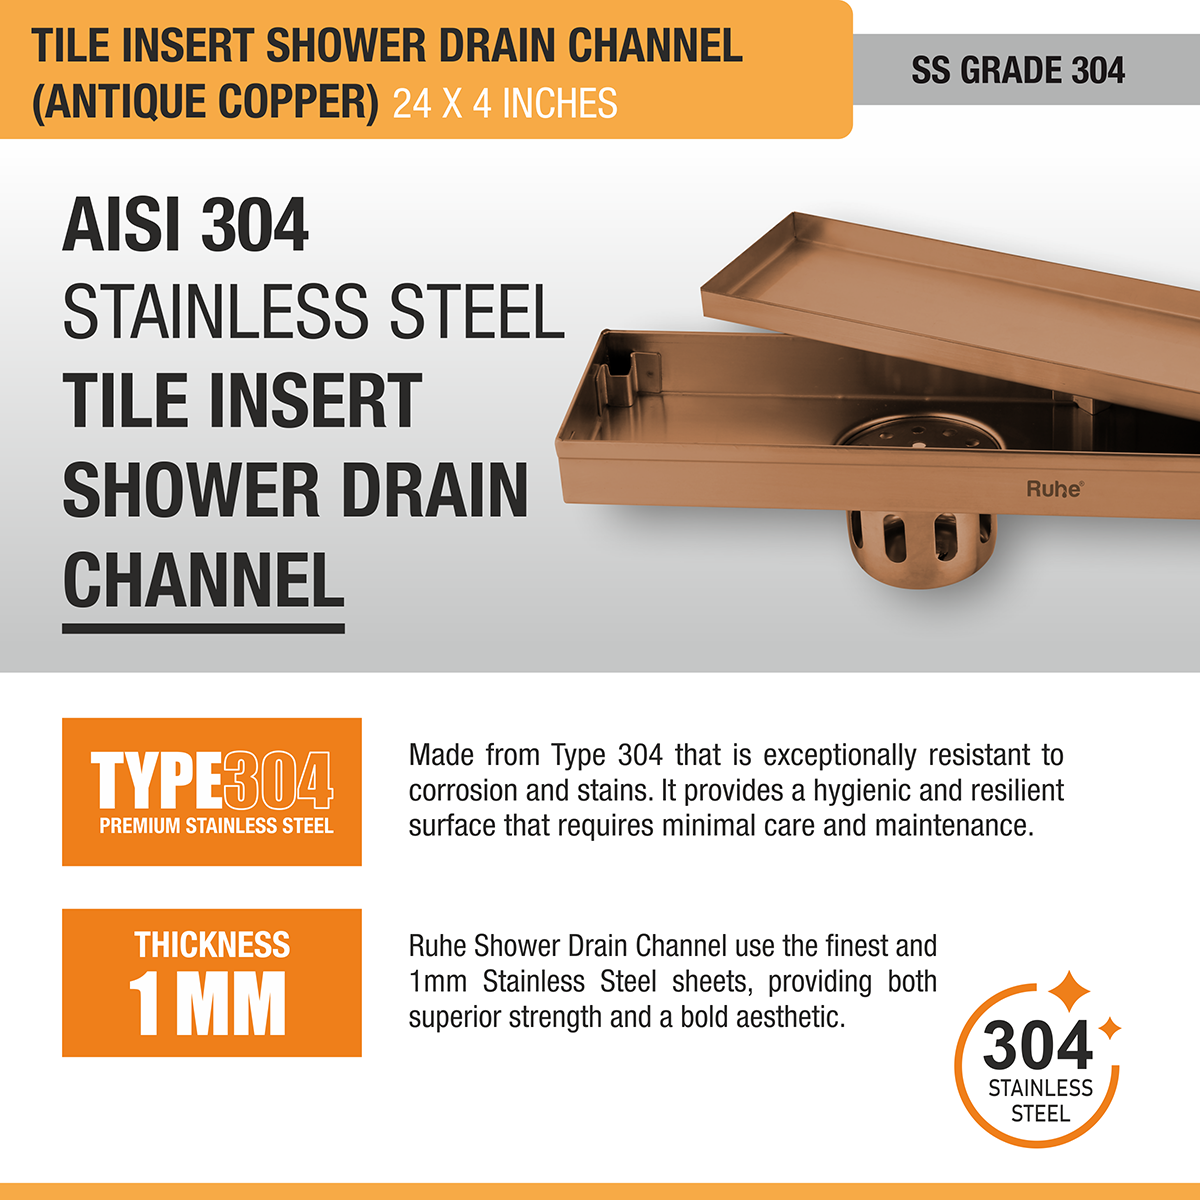 Tile Insert Shower Drain Channel (24 x 4 Inches) ROSE GOLD PVD Coated stainless steel